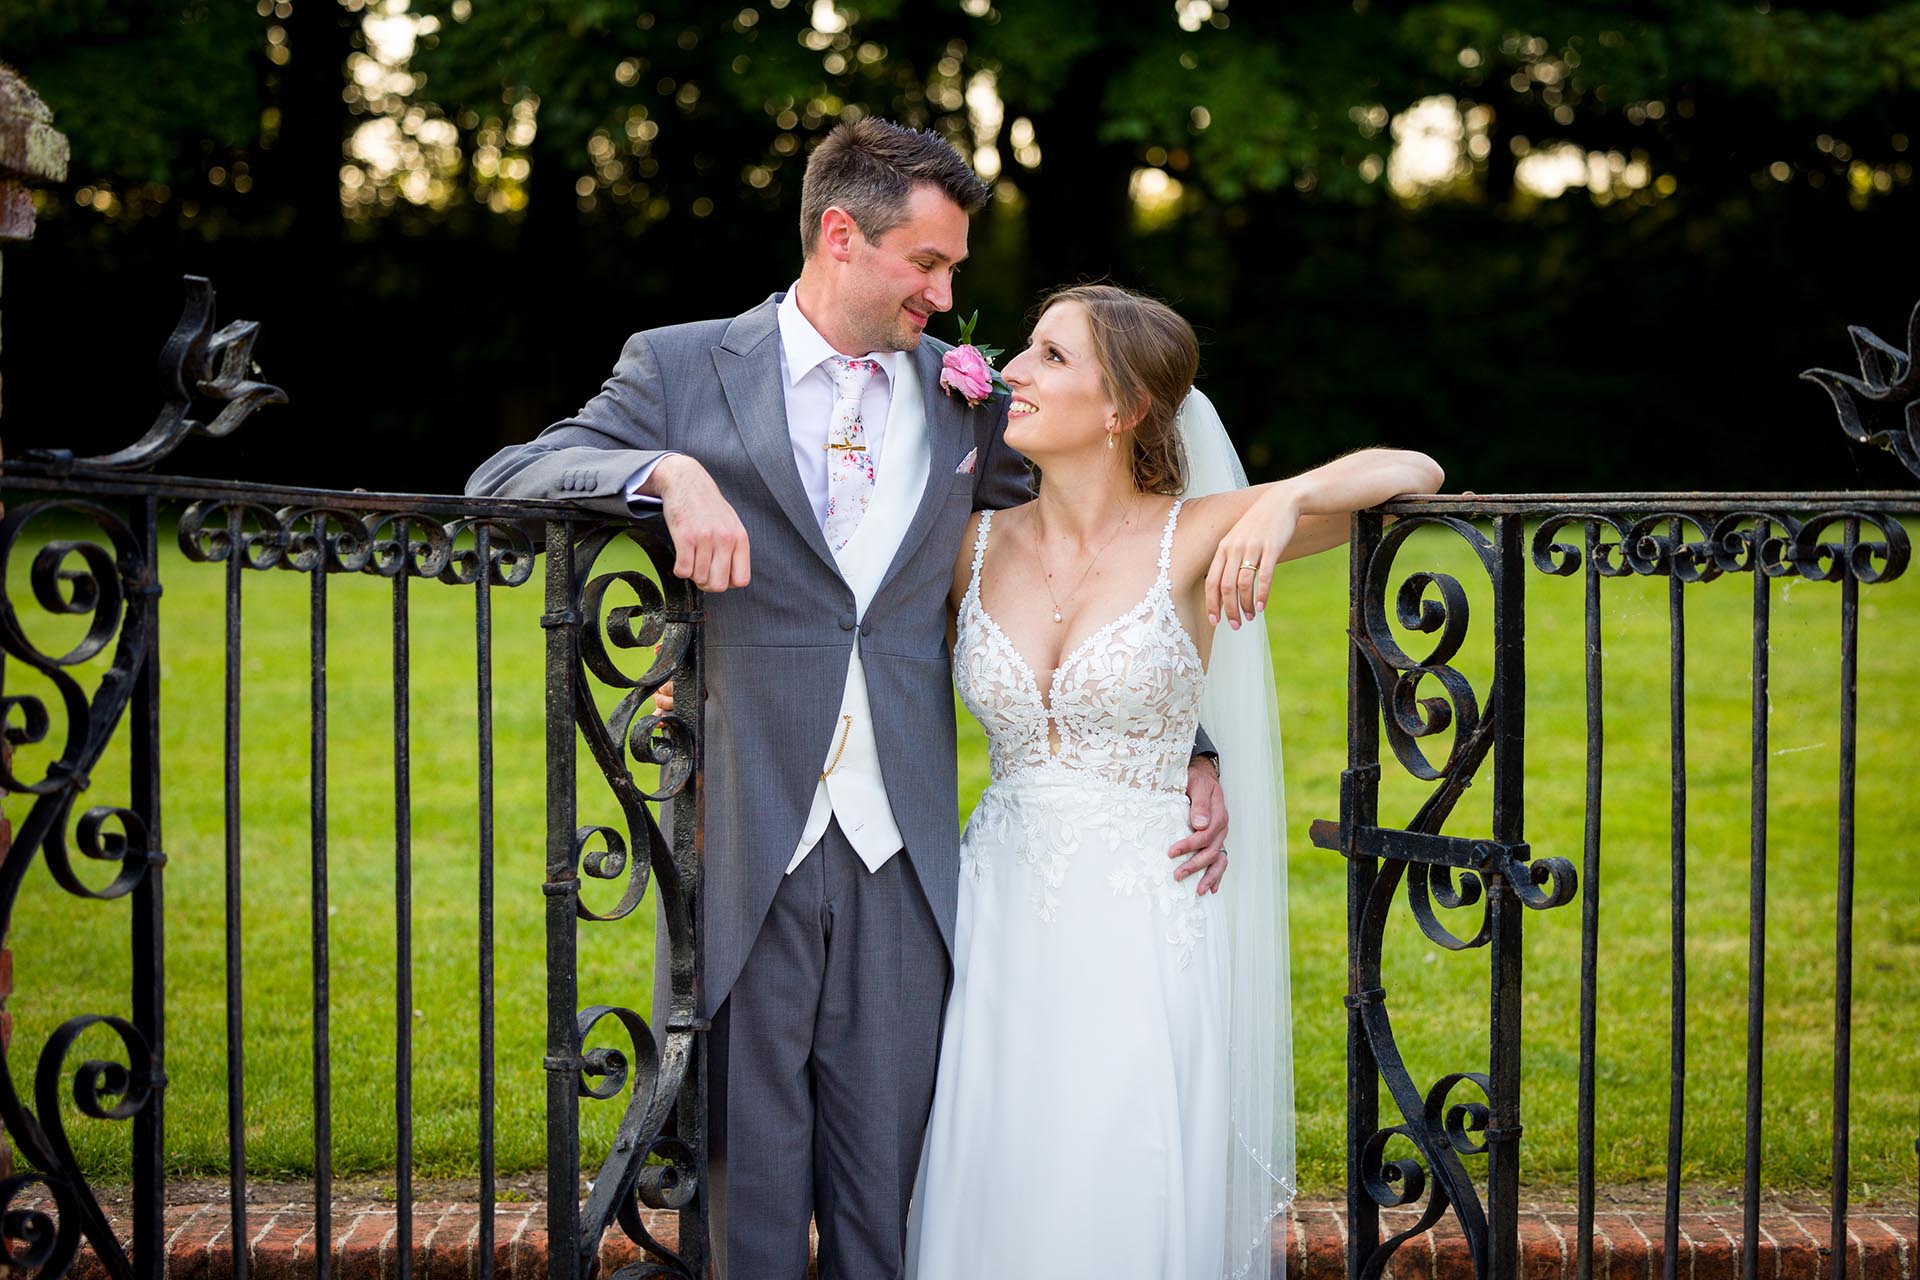 Bride and groom photograph at Leez Priory, Great Leighs, Chelmsford, Essex